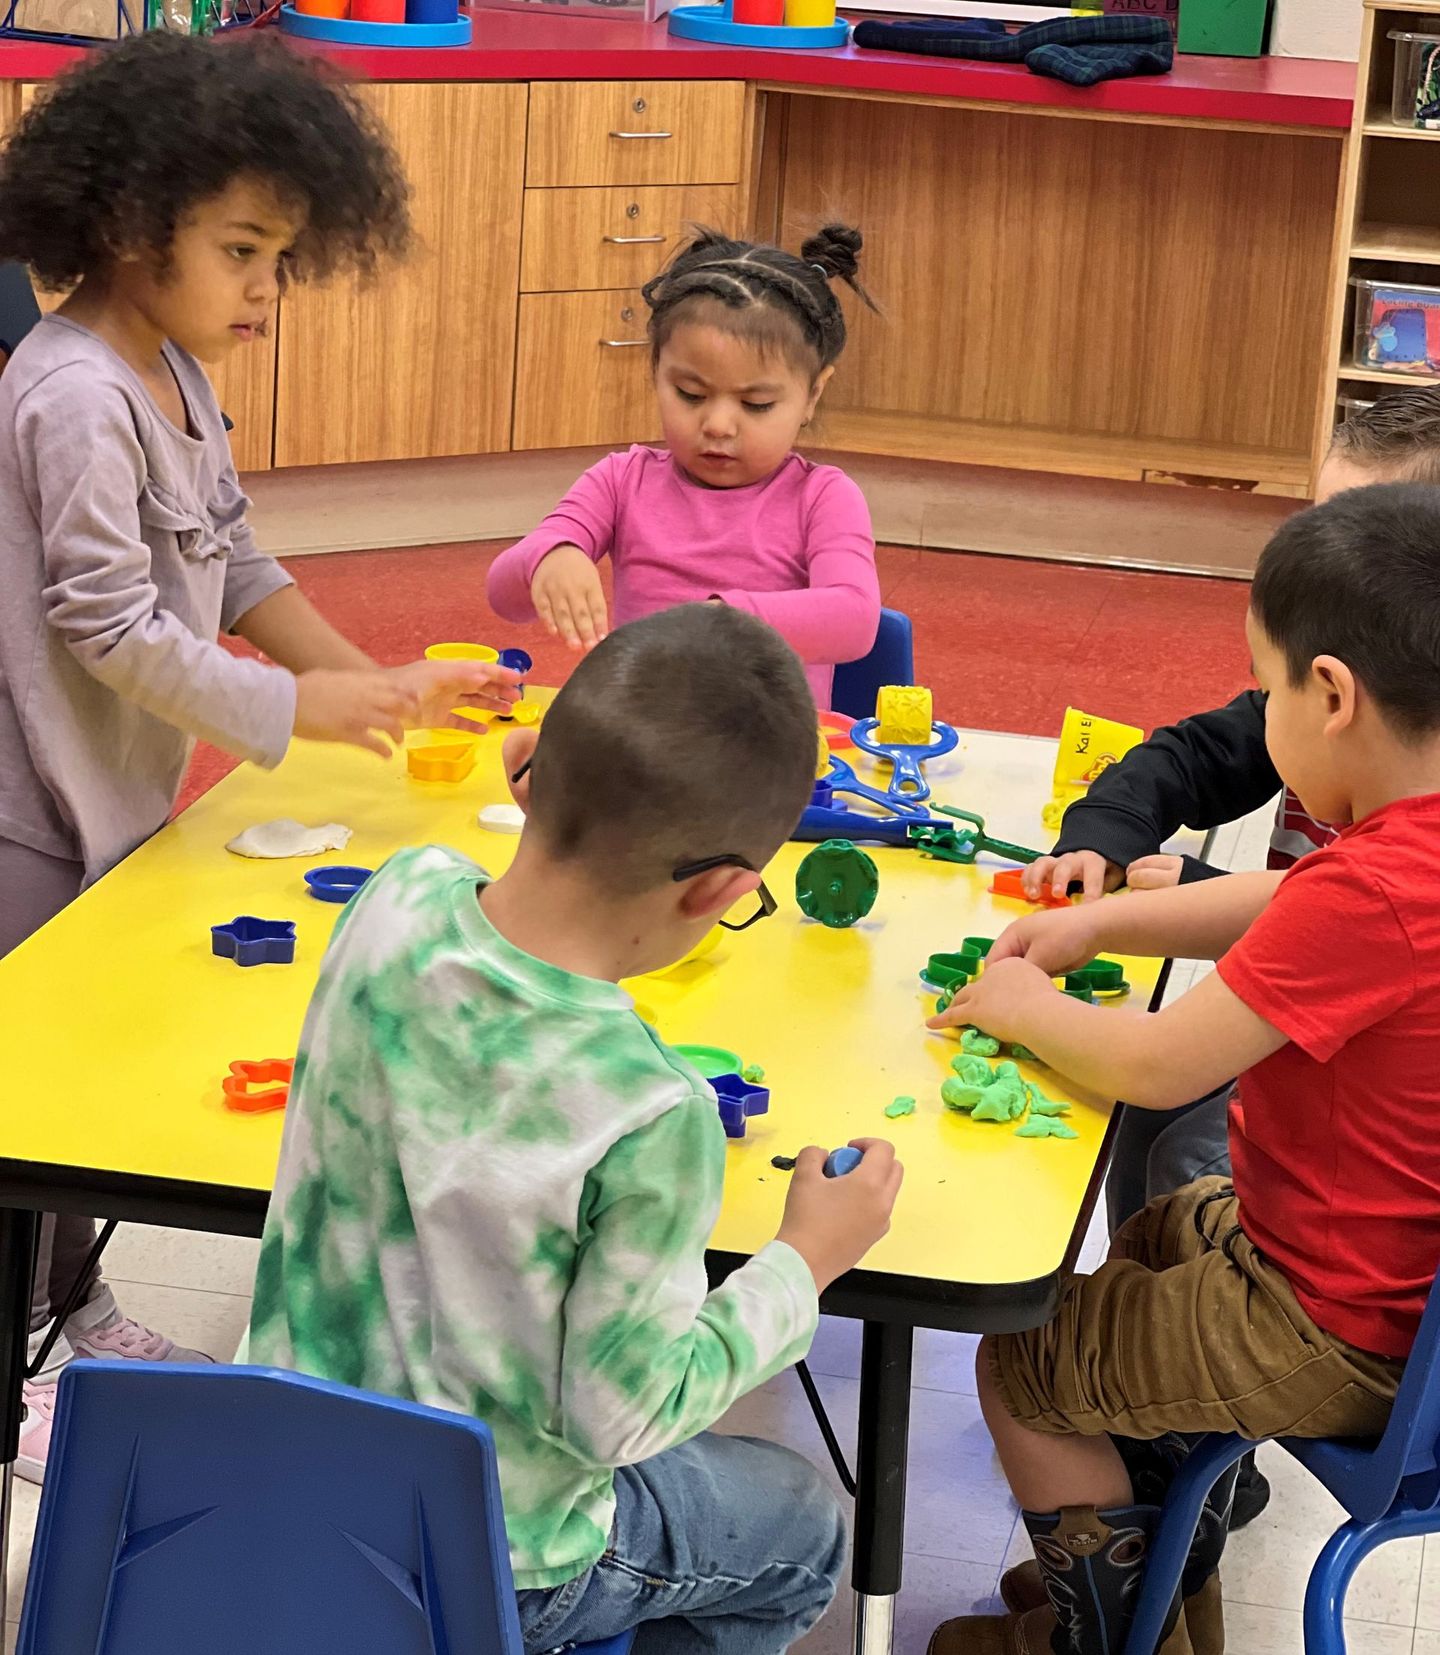 a group of children are playing with play dough at a table .